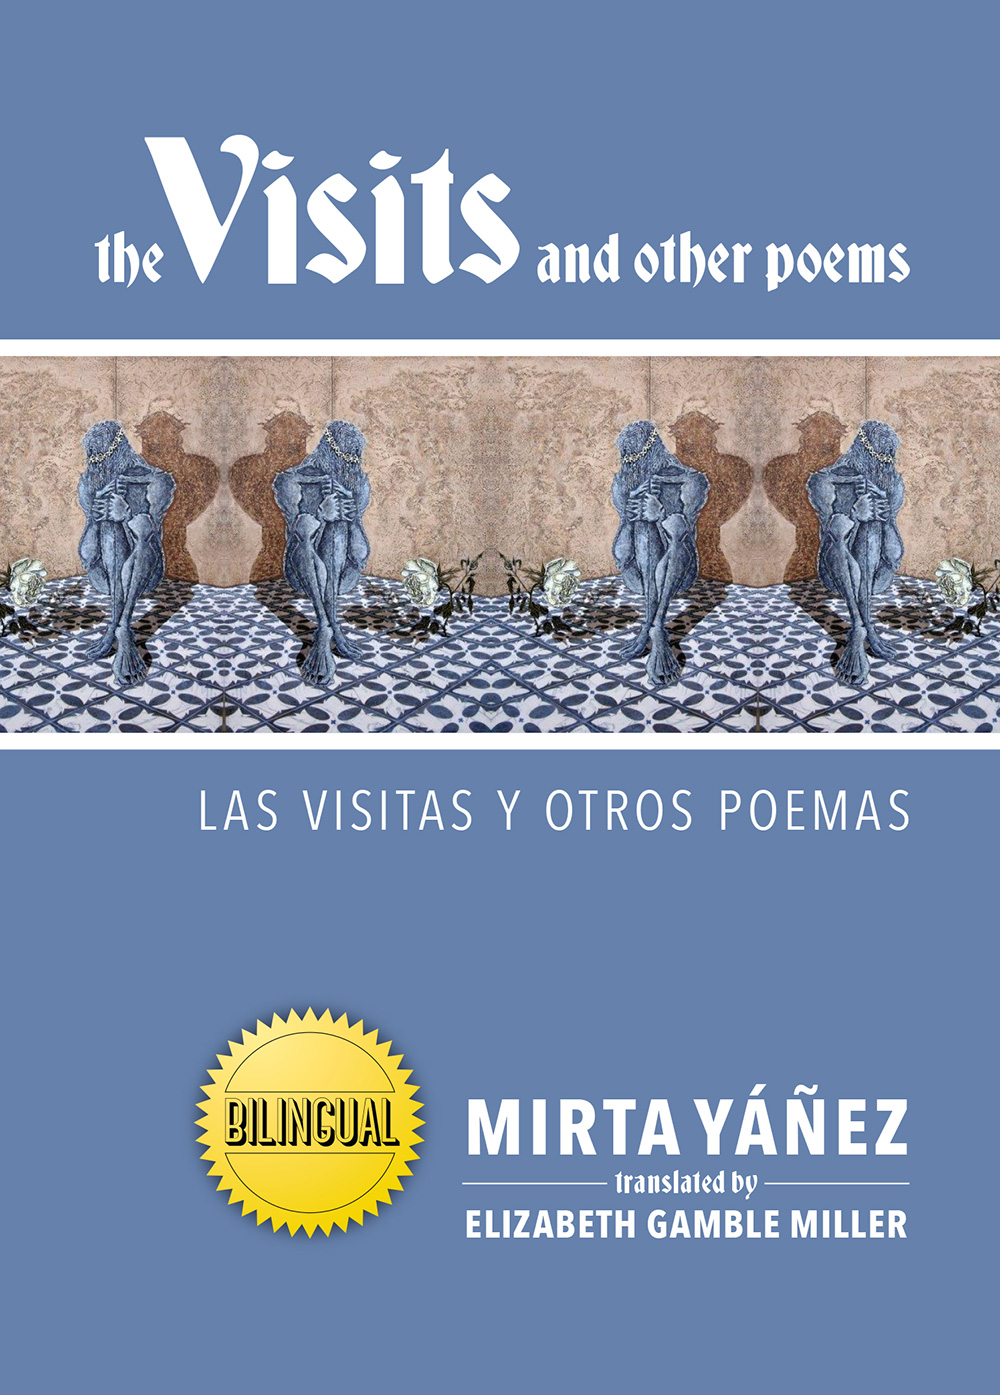 Book Cover: The Visits and Other Poems